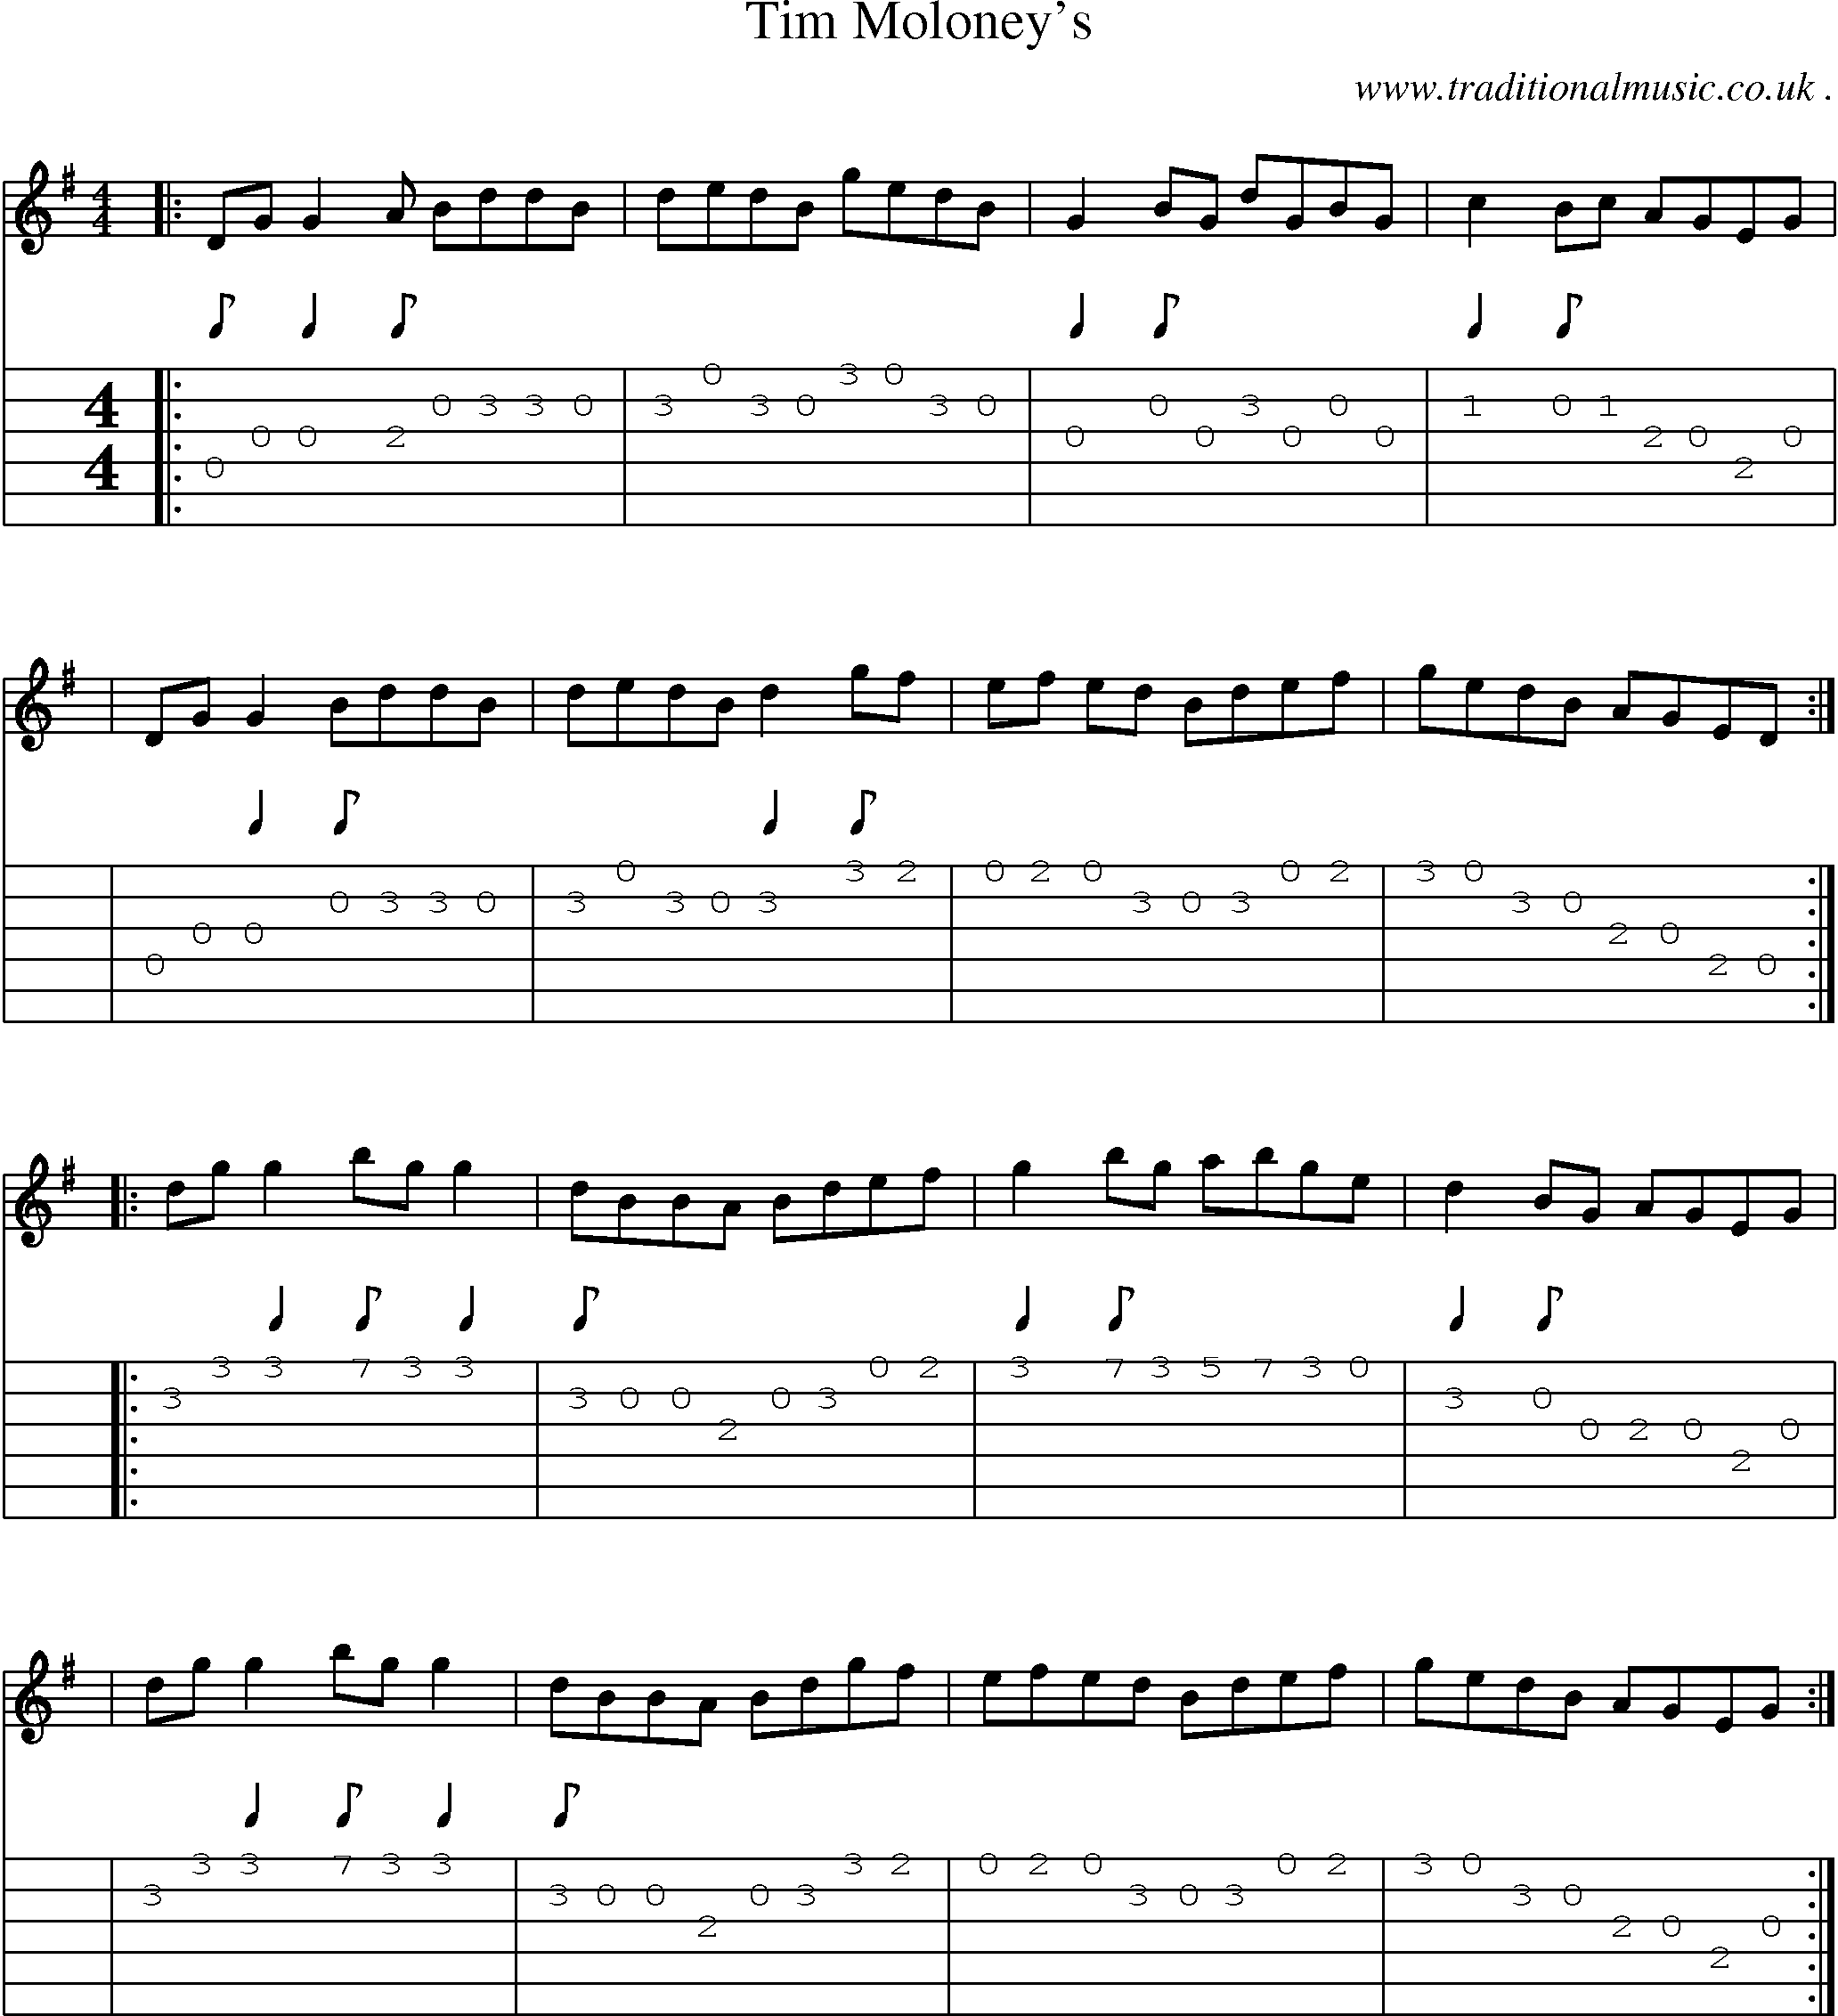 Sheet-Music and Guitar Tabs for Tim Moloneys